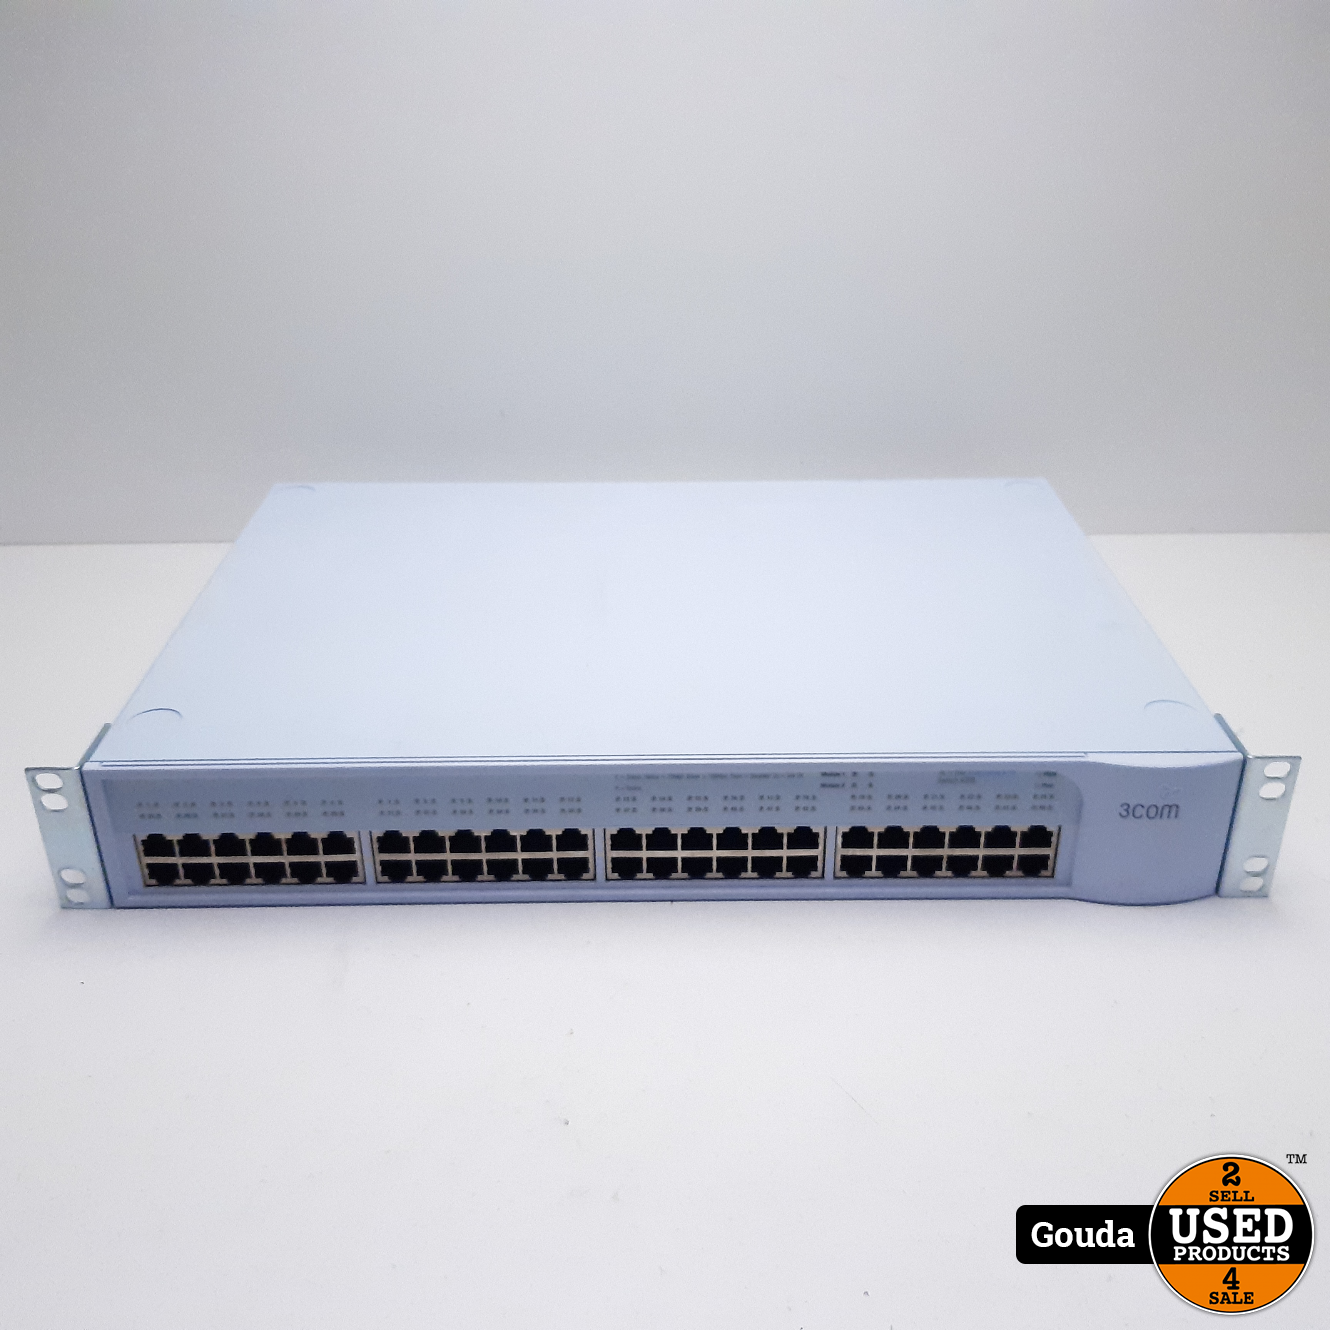 nicotine Boer Anzai 3com superstack 3 Internet switch 4300 48 port - Used Products Gouda